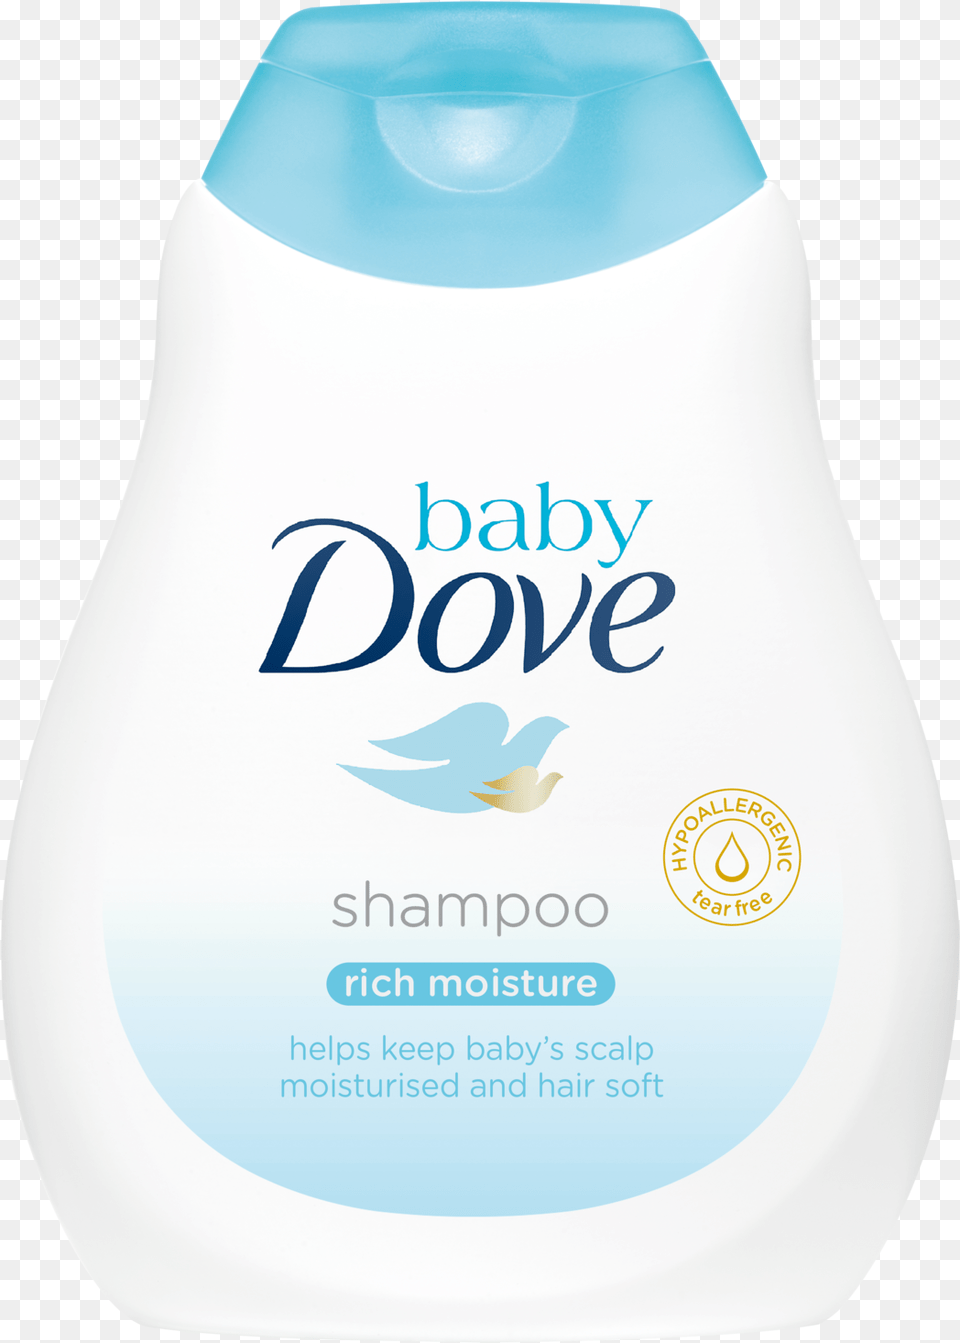 Baby Dove Rich Moisture Lotion, Bottle, Shampoo, Cosmetics Png